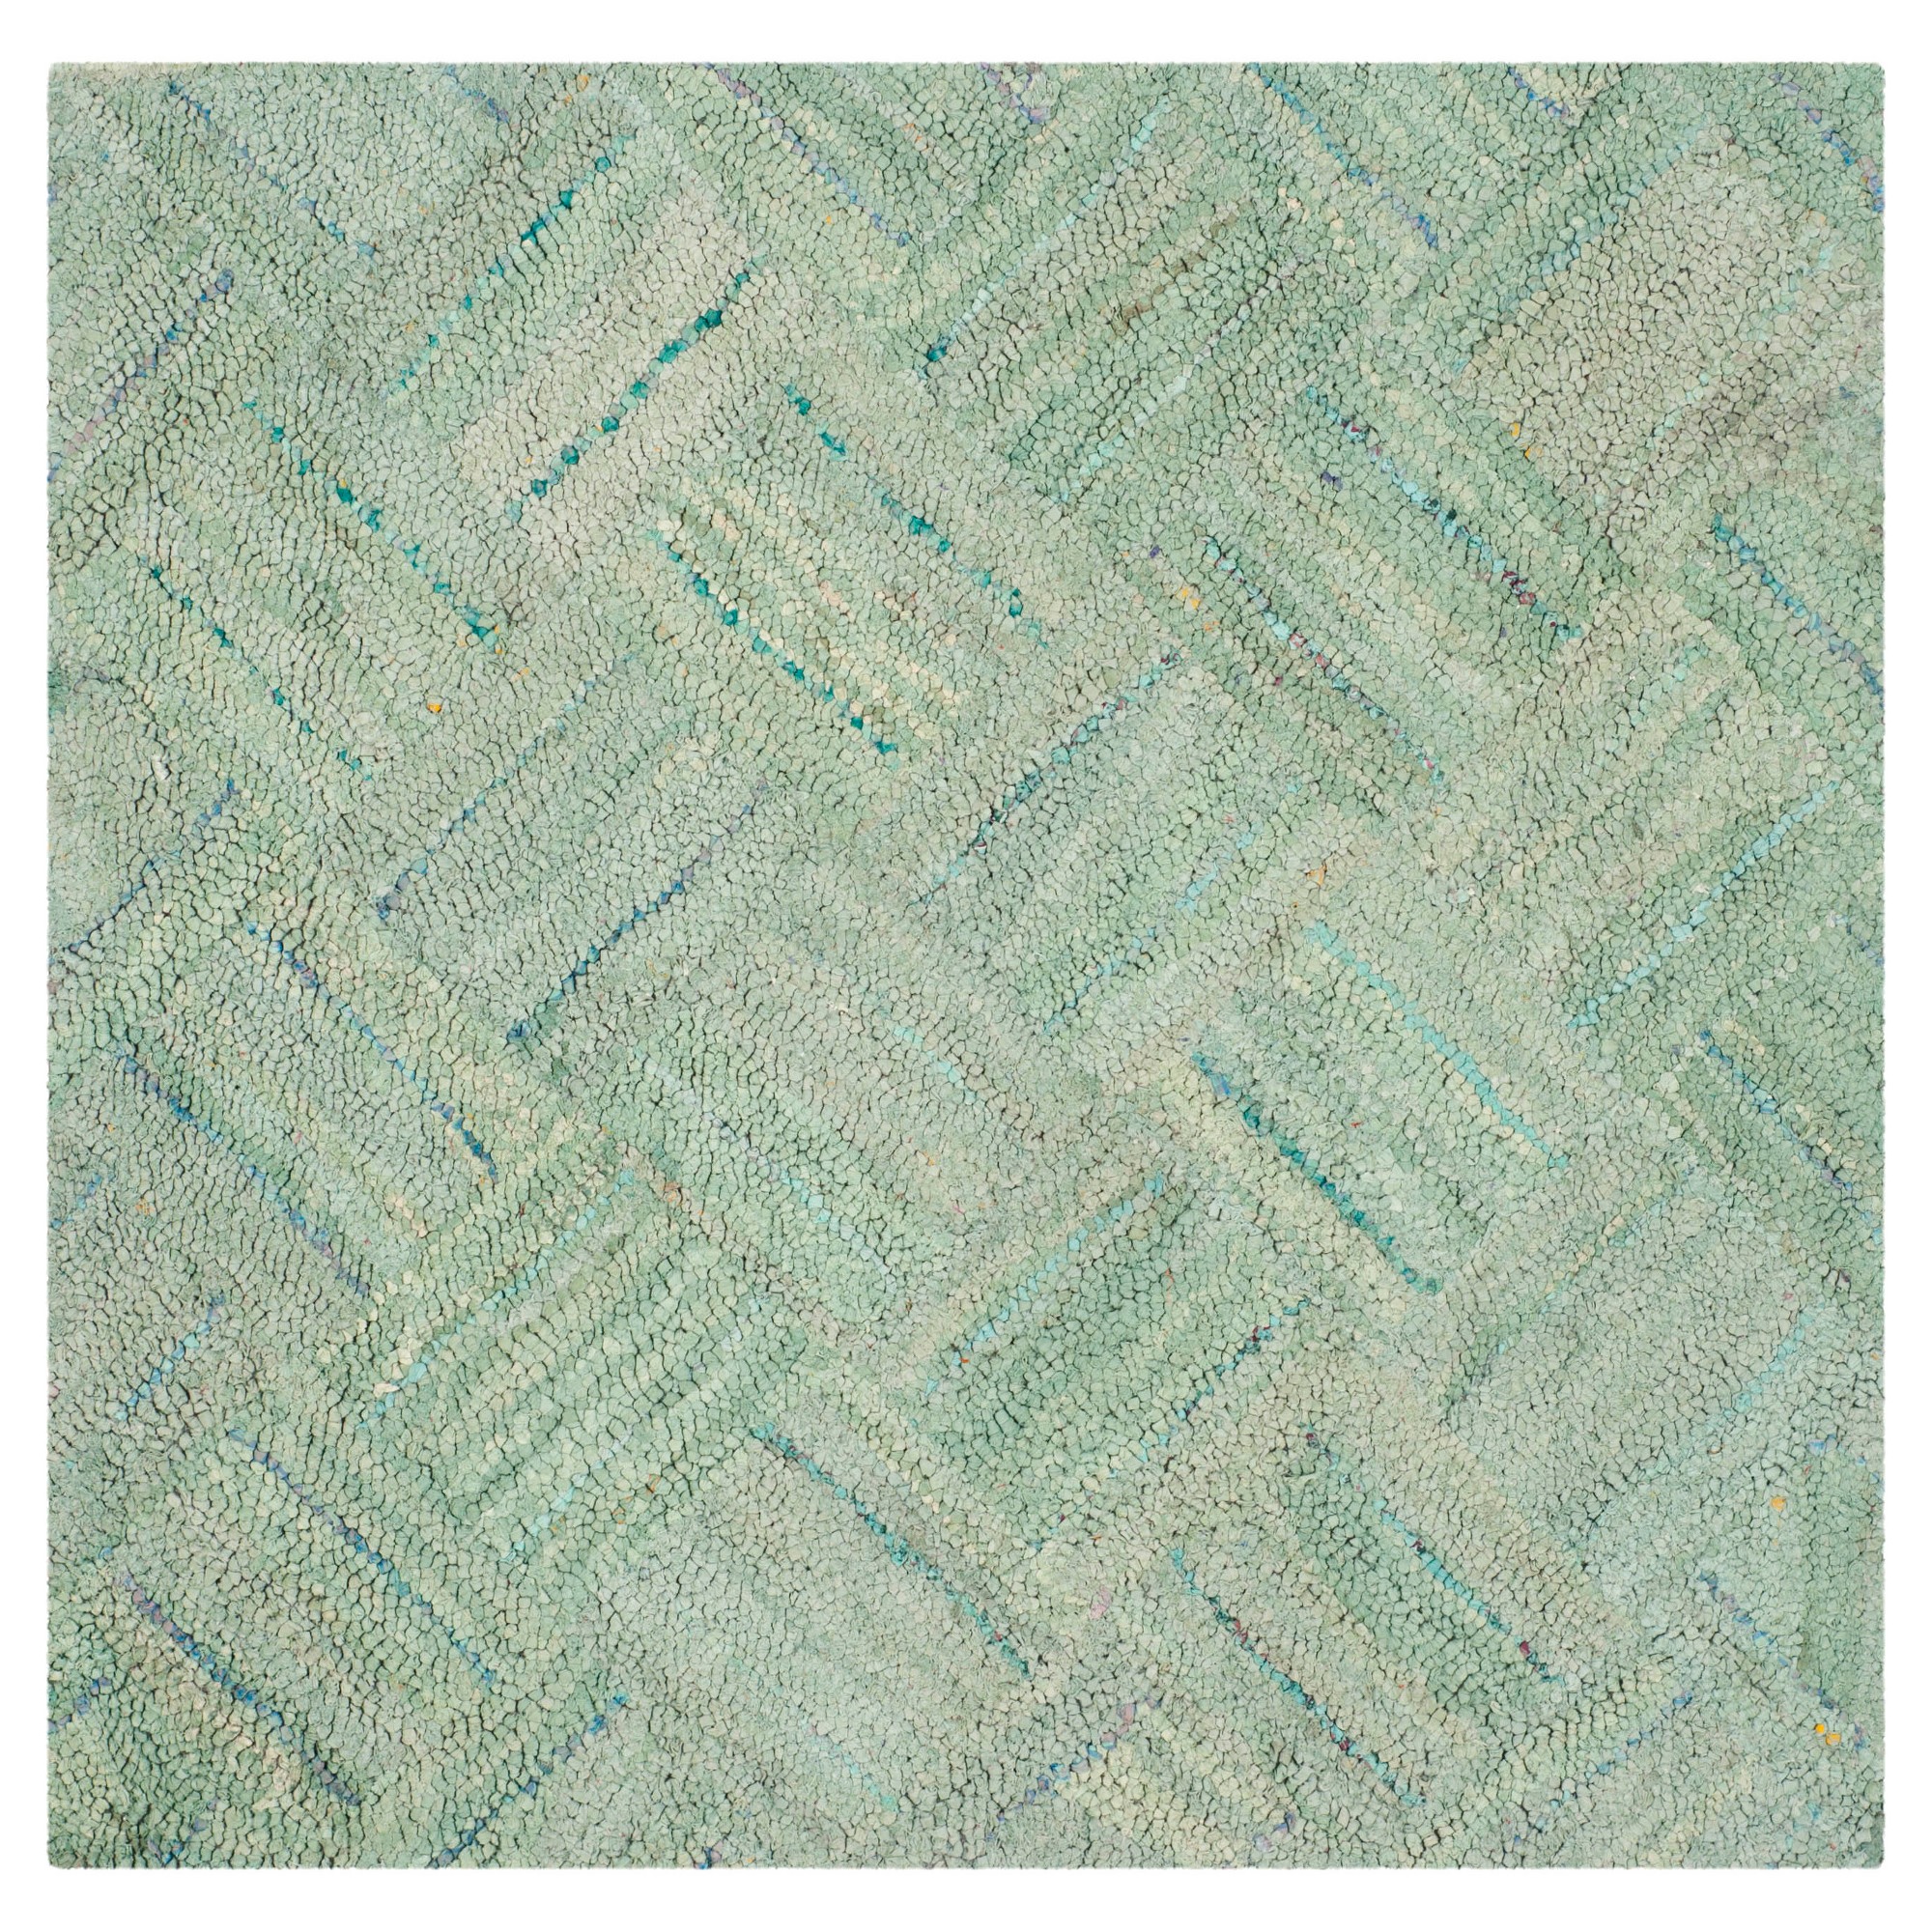 Reed Accent Rug - Green(4'x4' Square) - Safavieh